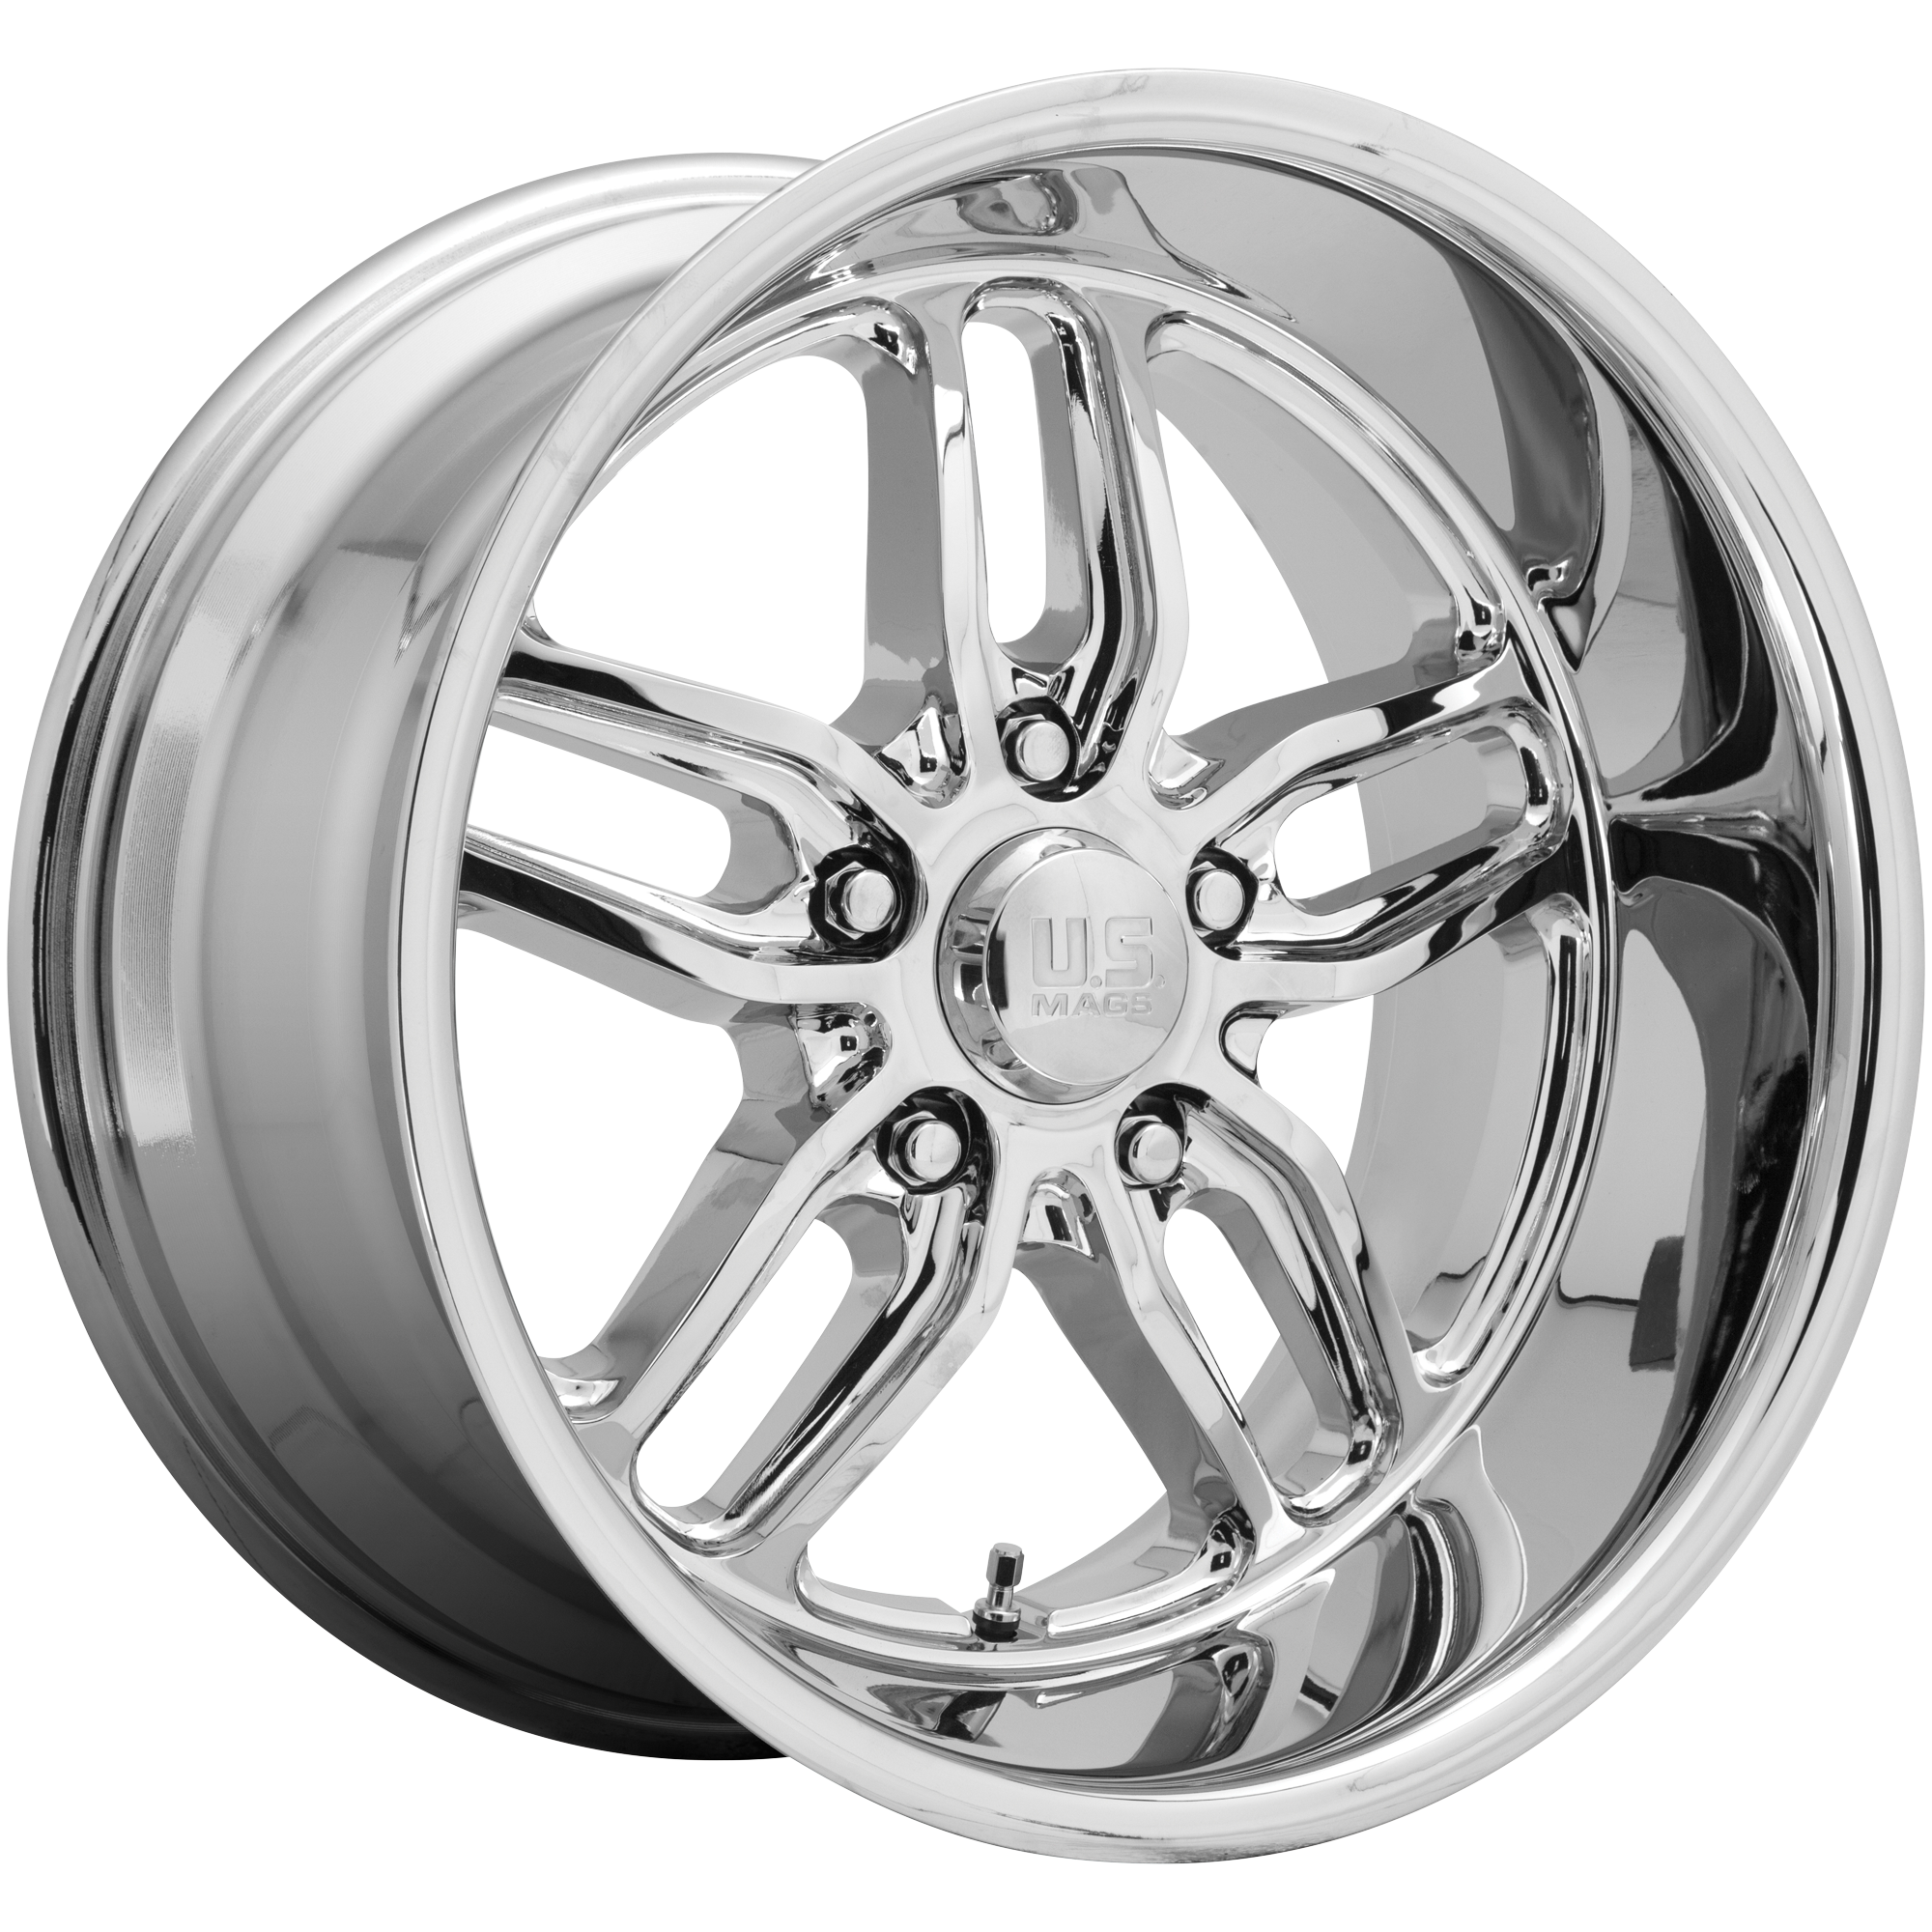 CTEN 22x8.5 5x127.00 CHROME PLATED (1 mm) - Tires and Engine Performance